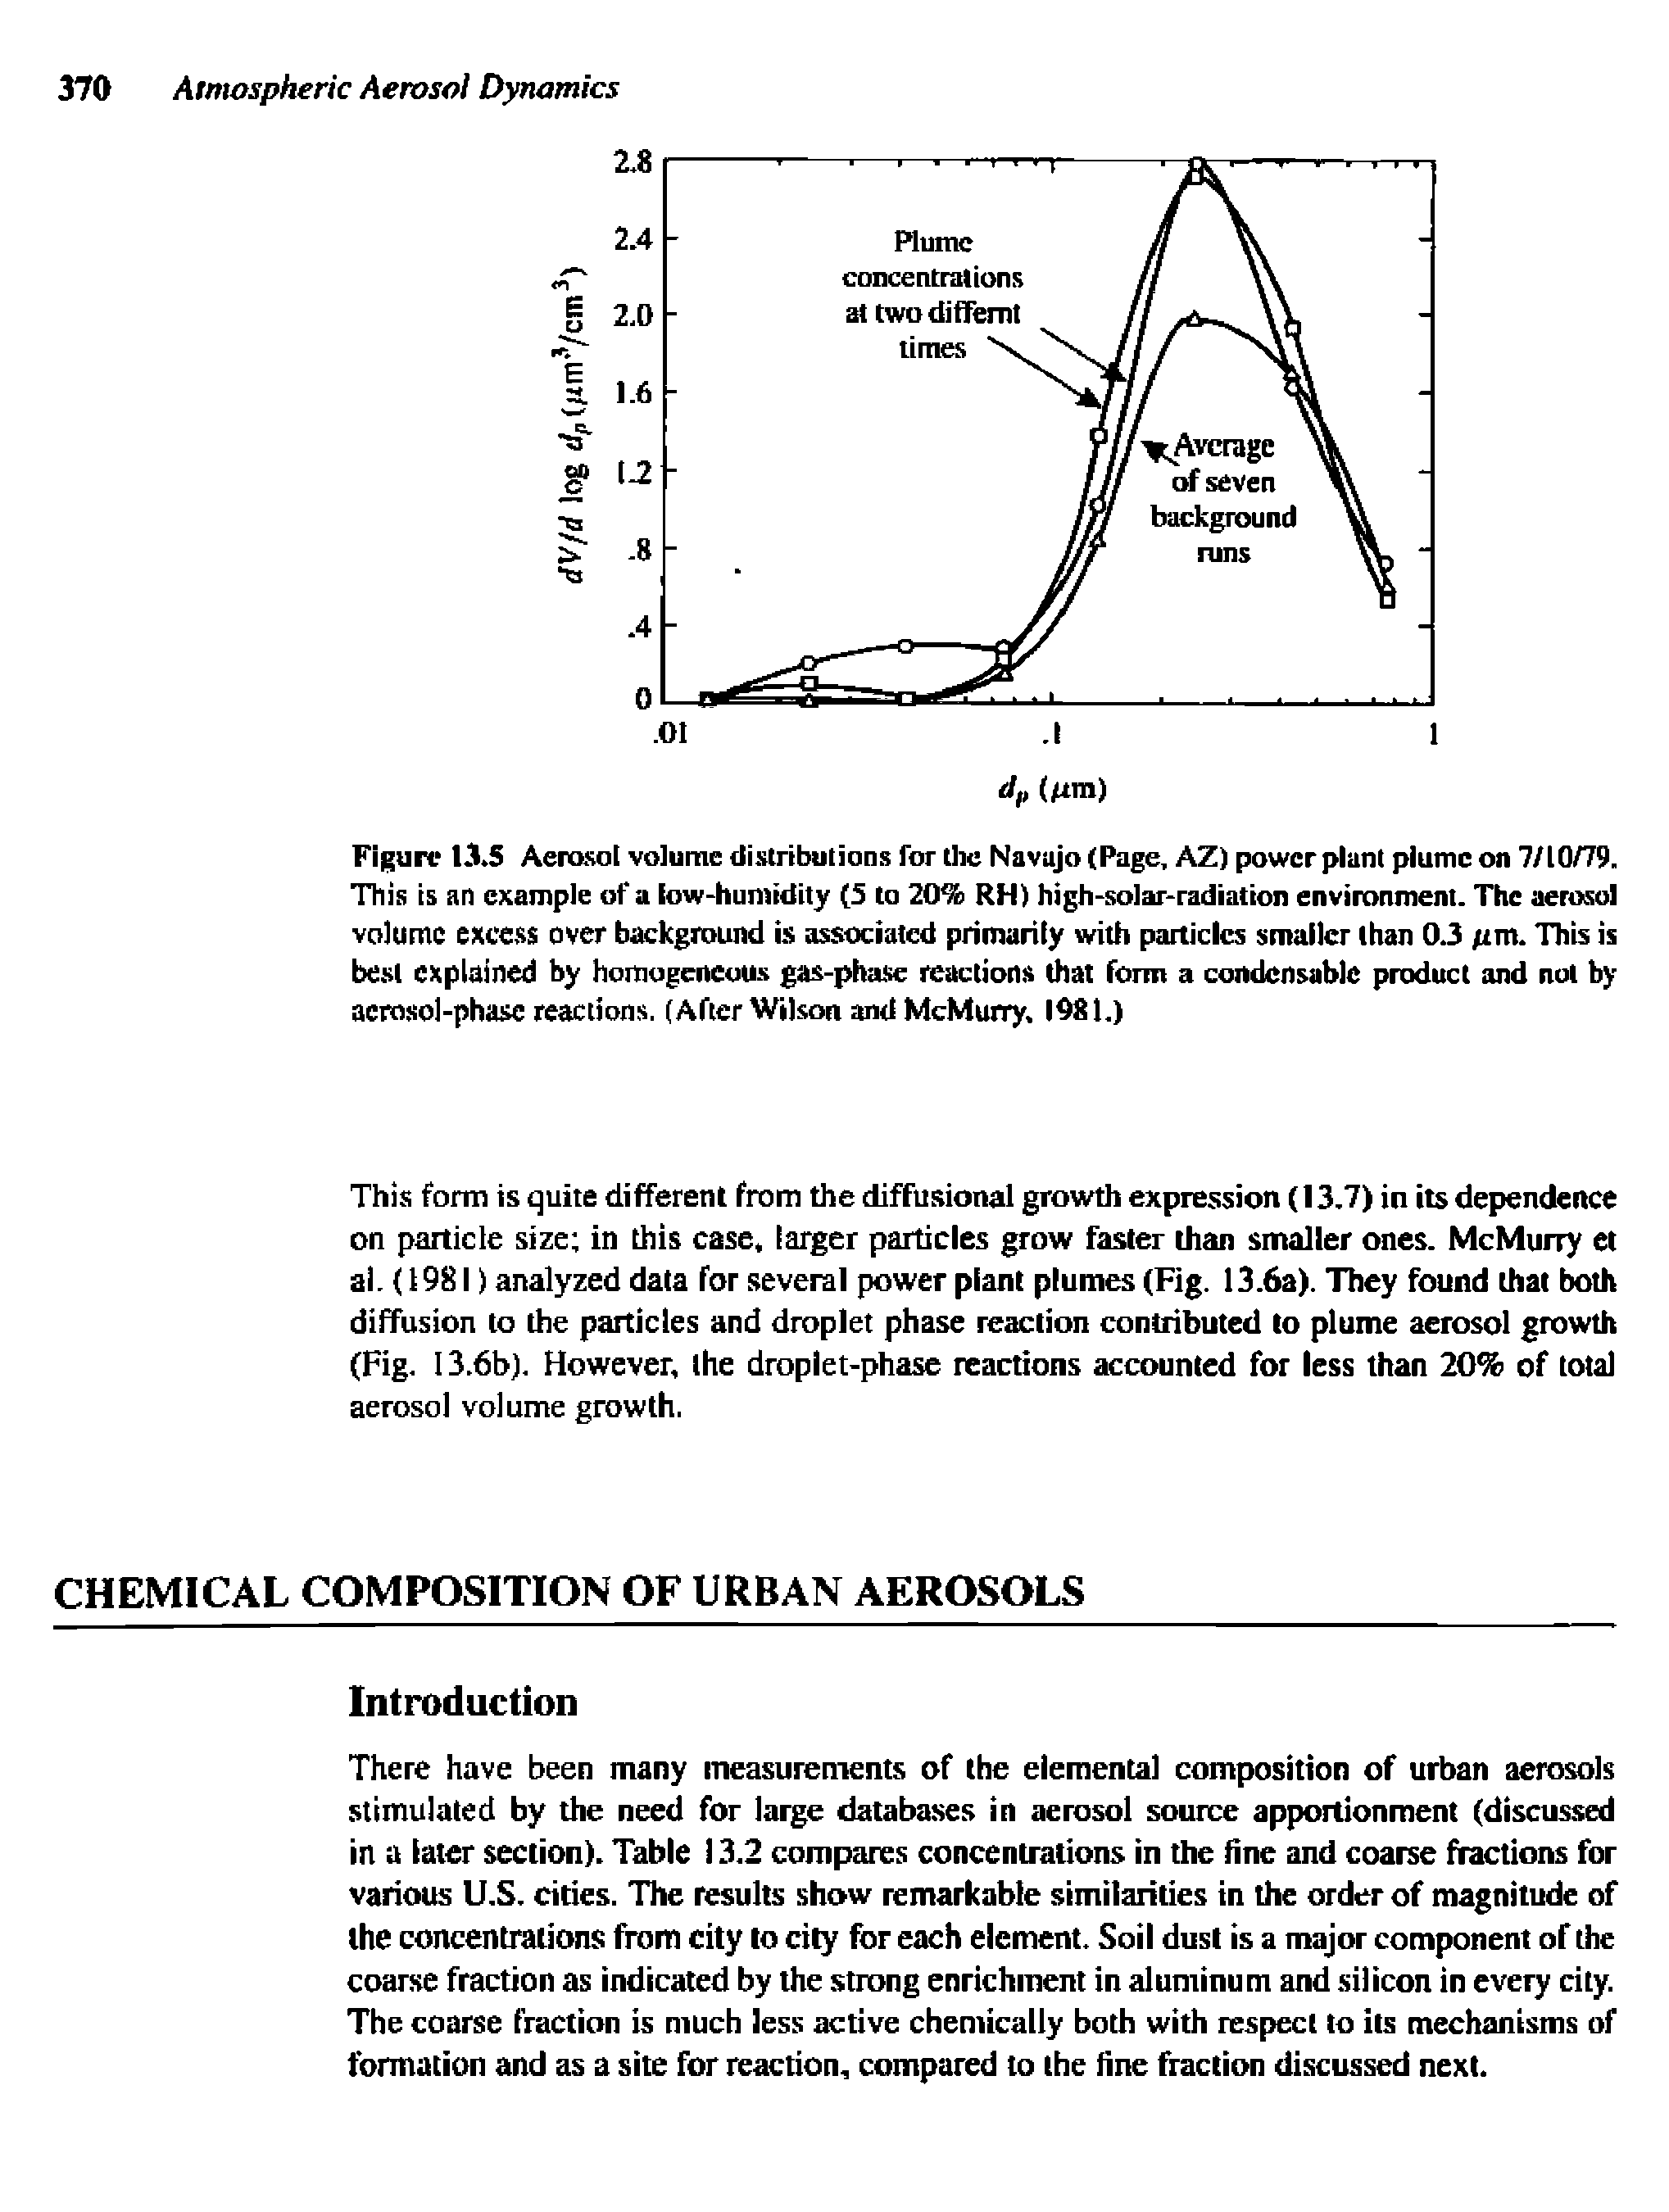 Figure 13.5 Aerosoi volume diiitributions for the Navujo (Page, AZ) power plant plume on 7/10/79. This is an example of a fow-humidity (3 to 20% RH) high-solar-radiation environment. The aerosol volume exce.ss over background Ls associated primarily with particles smaller than 0.3 /tm. This is be.si explained by homogcncuu. i gas-phase reactions that form a condensable product and not by aerosol-phase reactions. (After Wilson and McMurry. 1981.)...